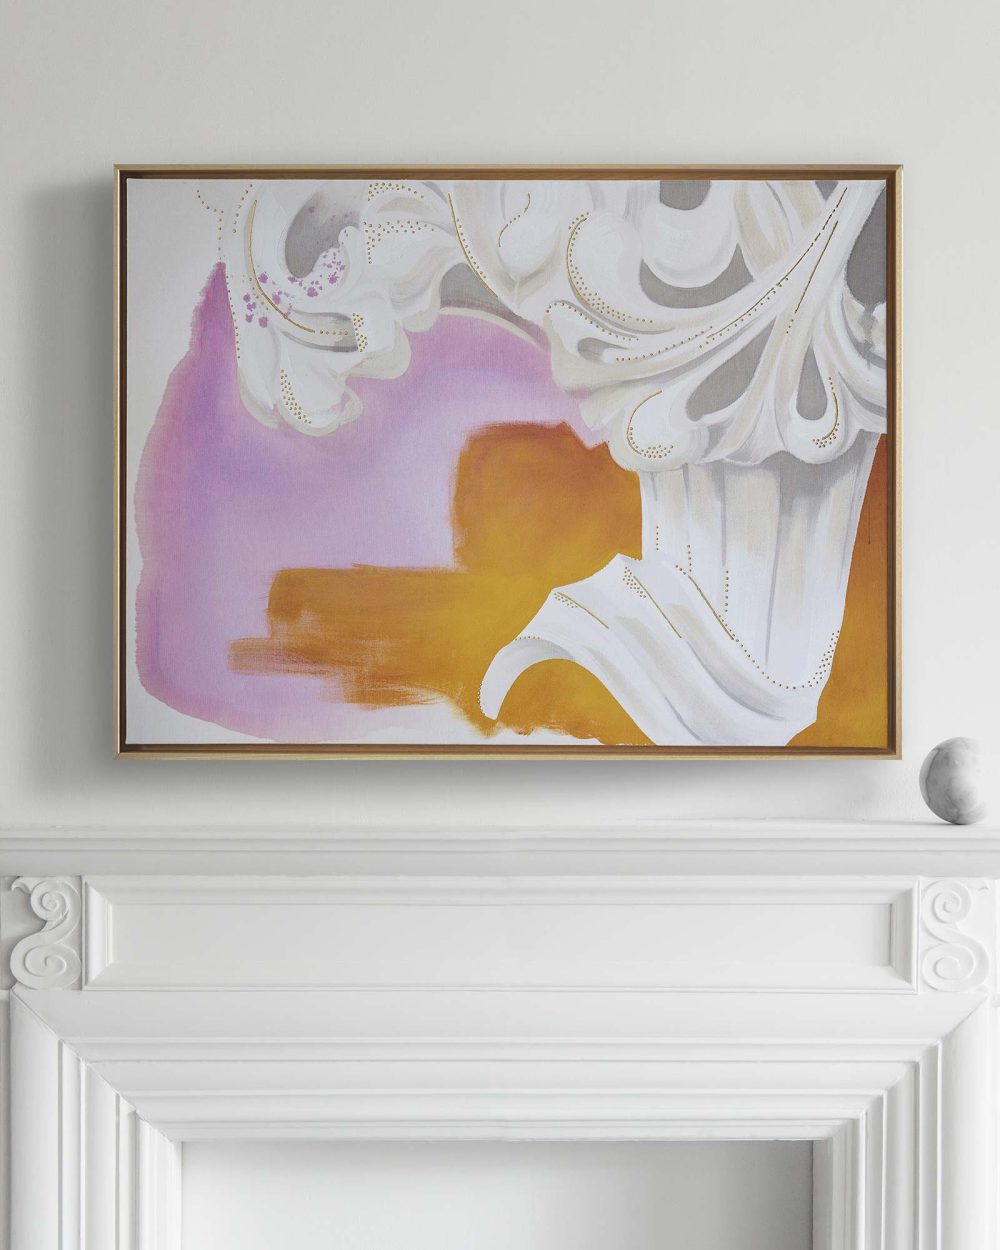 Meander No 2 - Landscape painting installed over fireplace mantel - Architectural Detail painting in pink, white and yellow acrylic and gold leaf, by Teale Hatheway